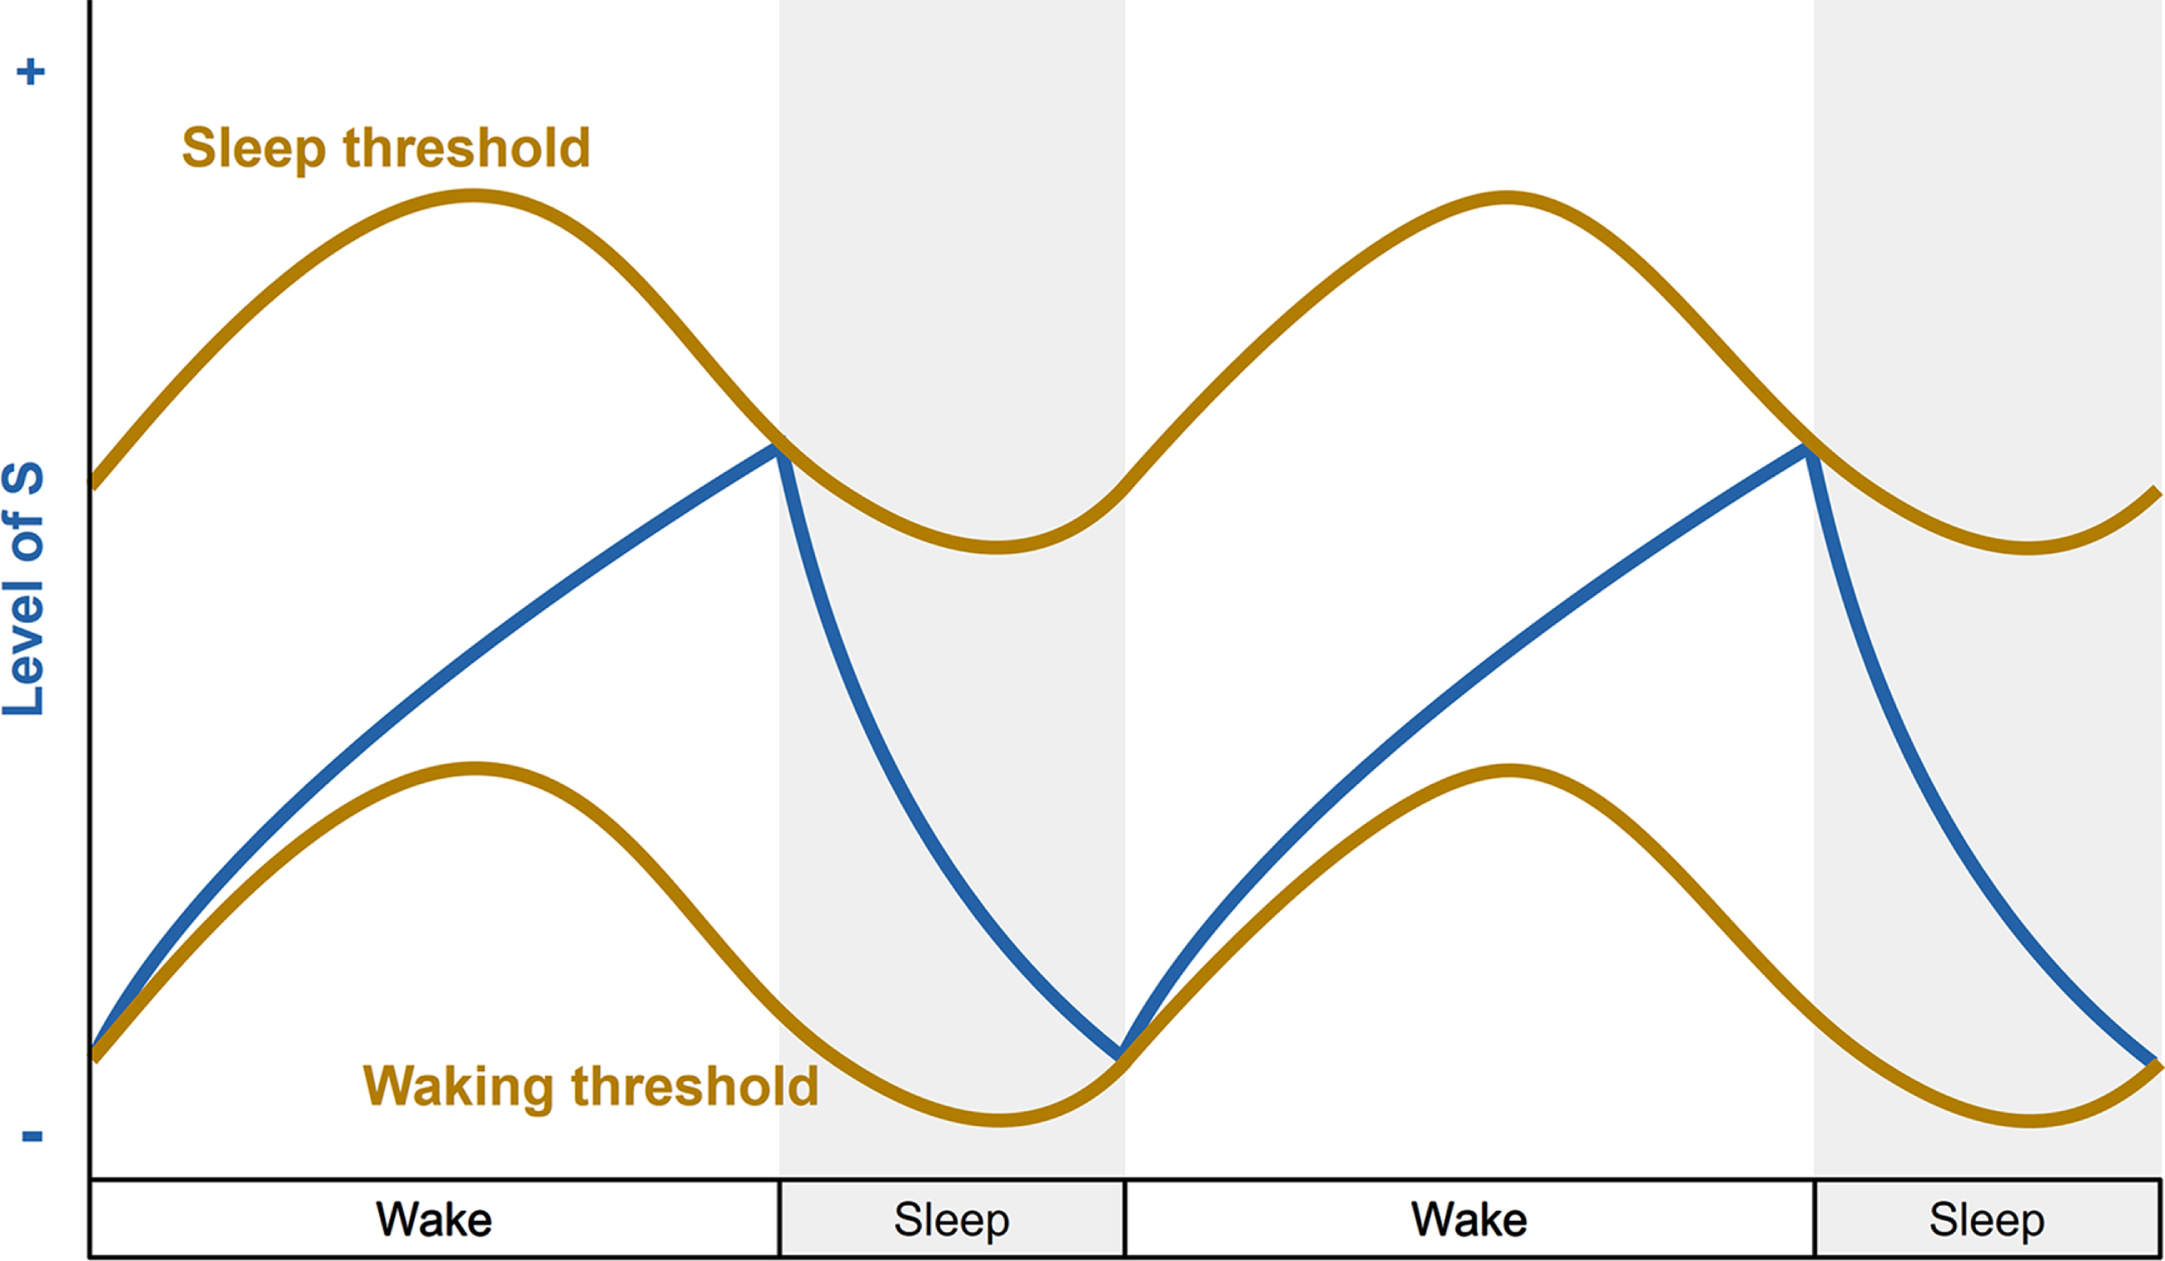 The two-process model of sleep regulation. Simplified representation of the homeostatic process S (blue line) and circadian process C (brown lines) over a two-day period with 16 hours of wakefulness and 8 hours of sleep (grey bars). During the increase of process S, the individual is awake and the sleep pressure builds up. When process S reaches the upper threshold of process C, the individual falls asleep and process S decreases until it reaches the lower threshold of process C, which triggers the awakening of the individual.